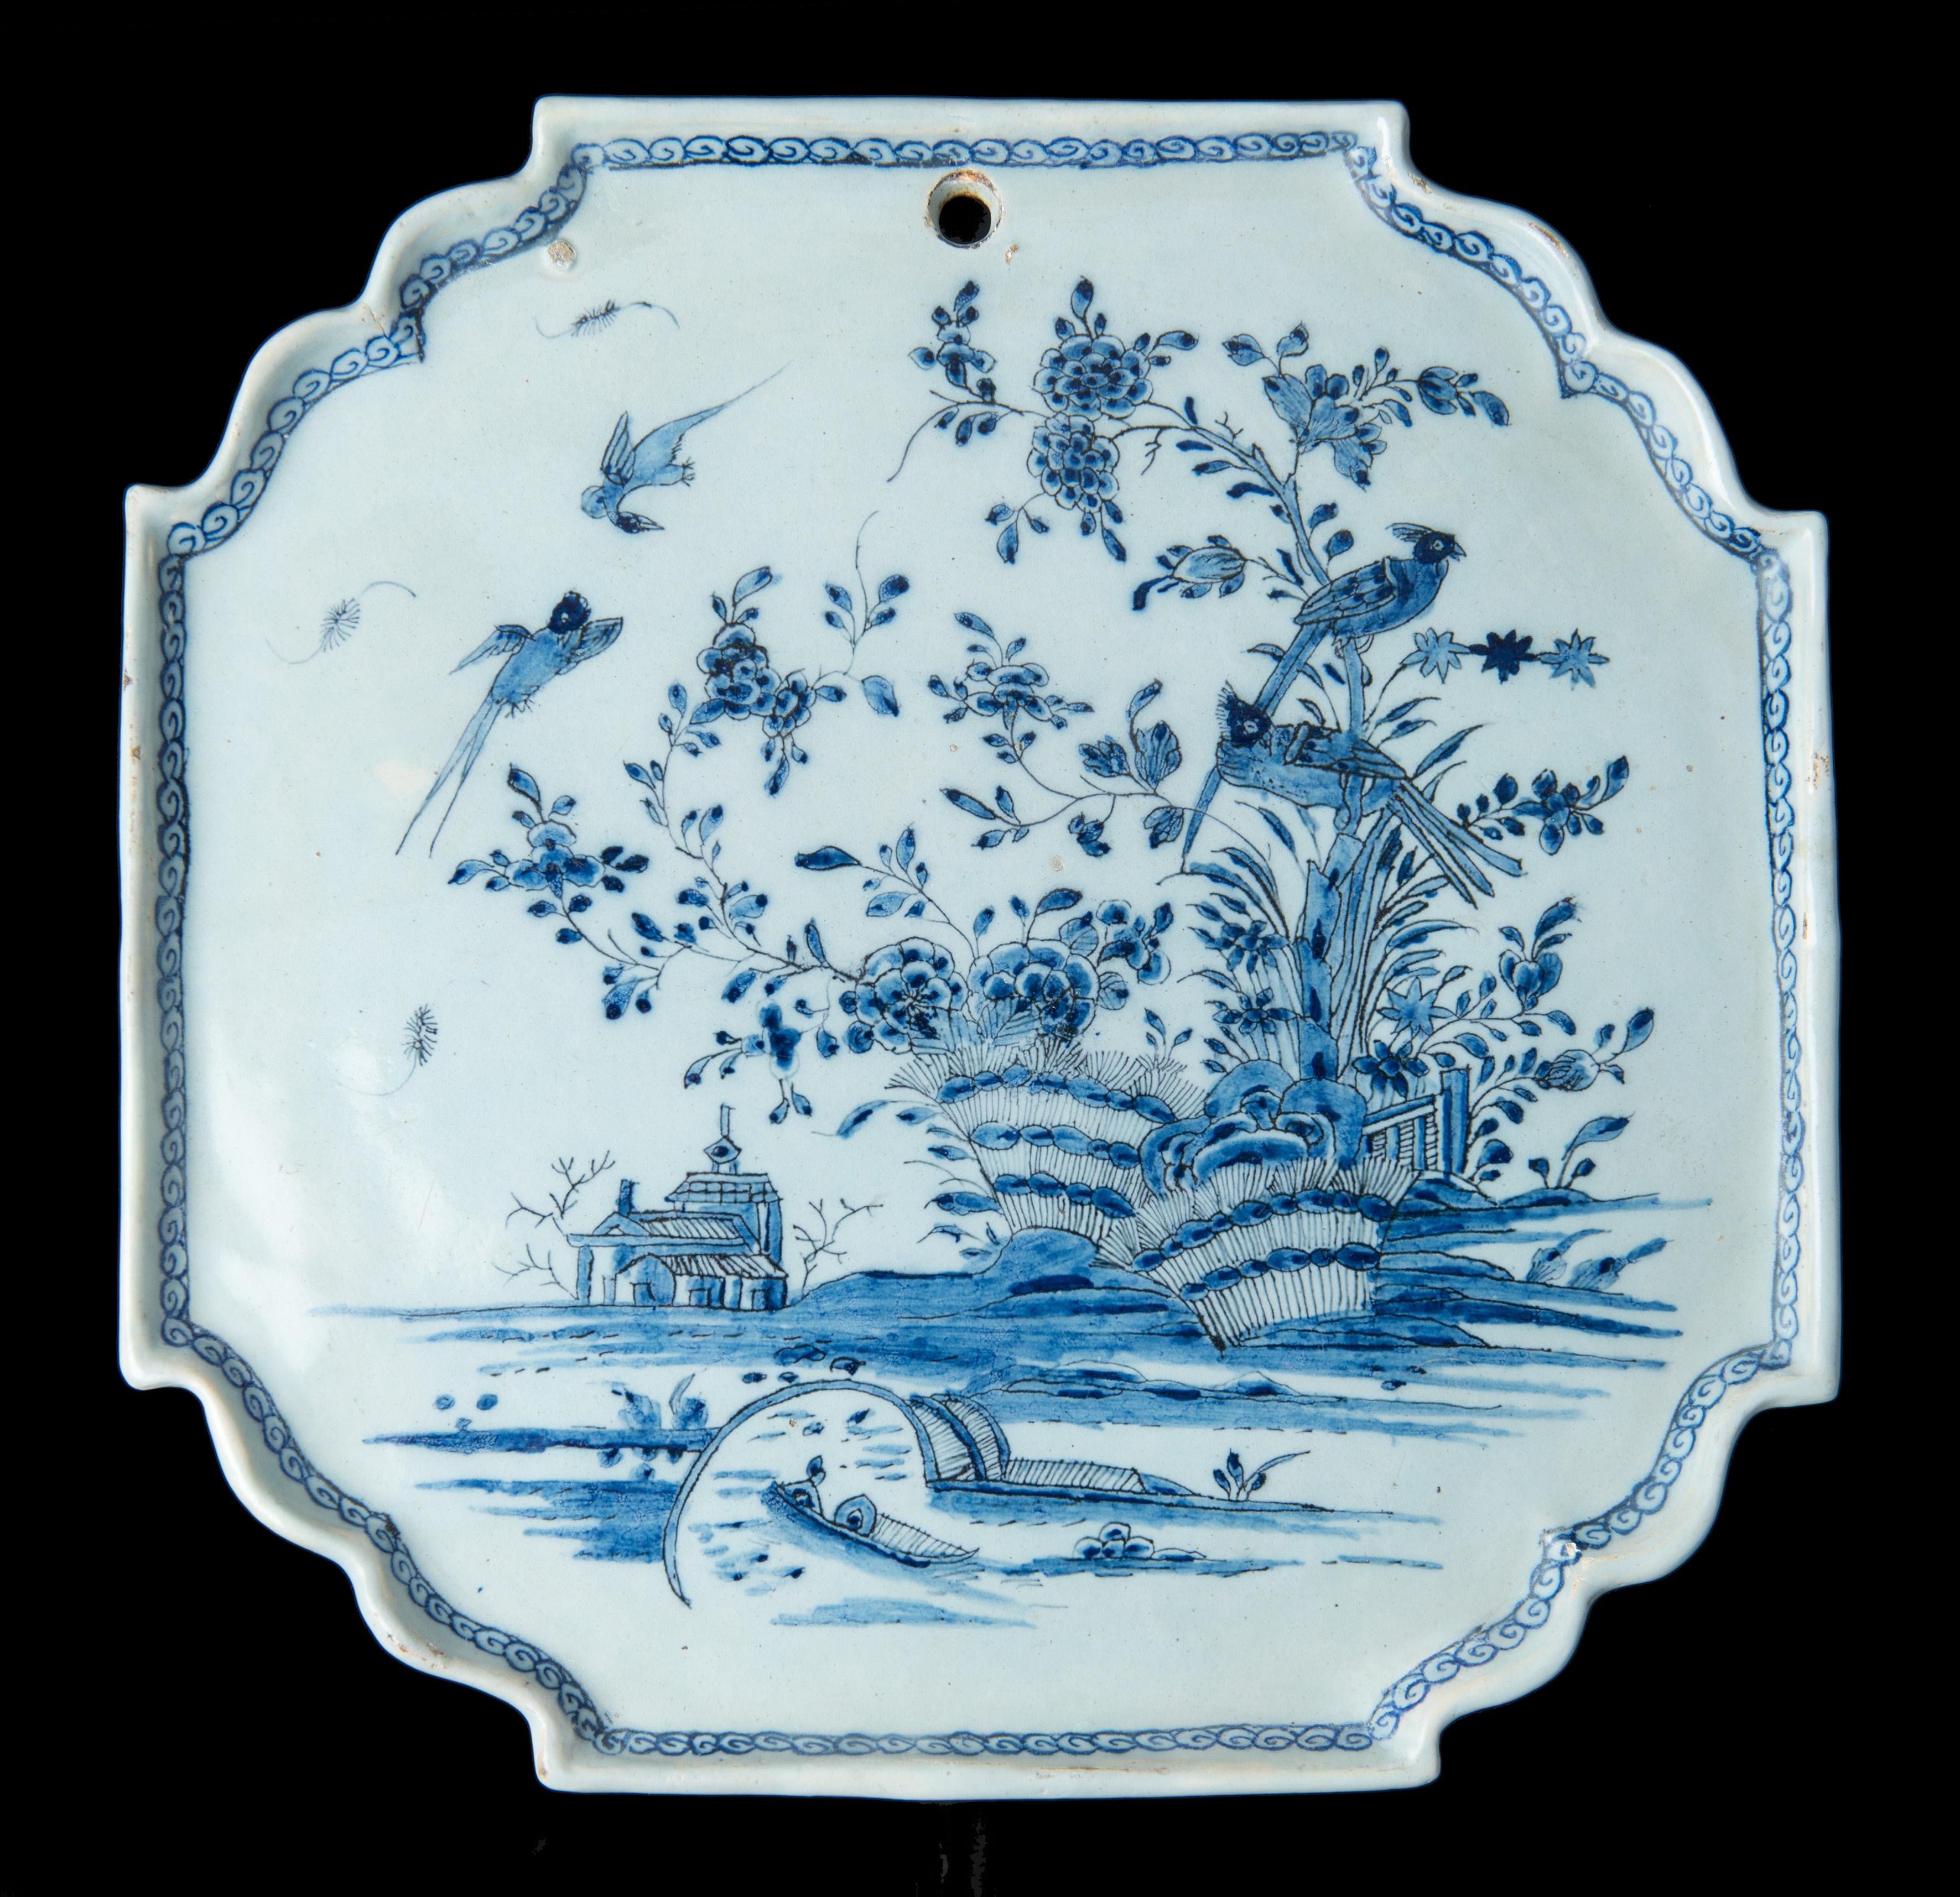 Blue and white chinoiserie plaque. Delft, 1740-1760.

This octagonal plaque has a thin, straight, upright rim with indented accolade-shaped corners, which is decorated on the inside with a continuous scroll ornament. The plaque is painted in blue